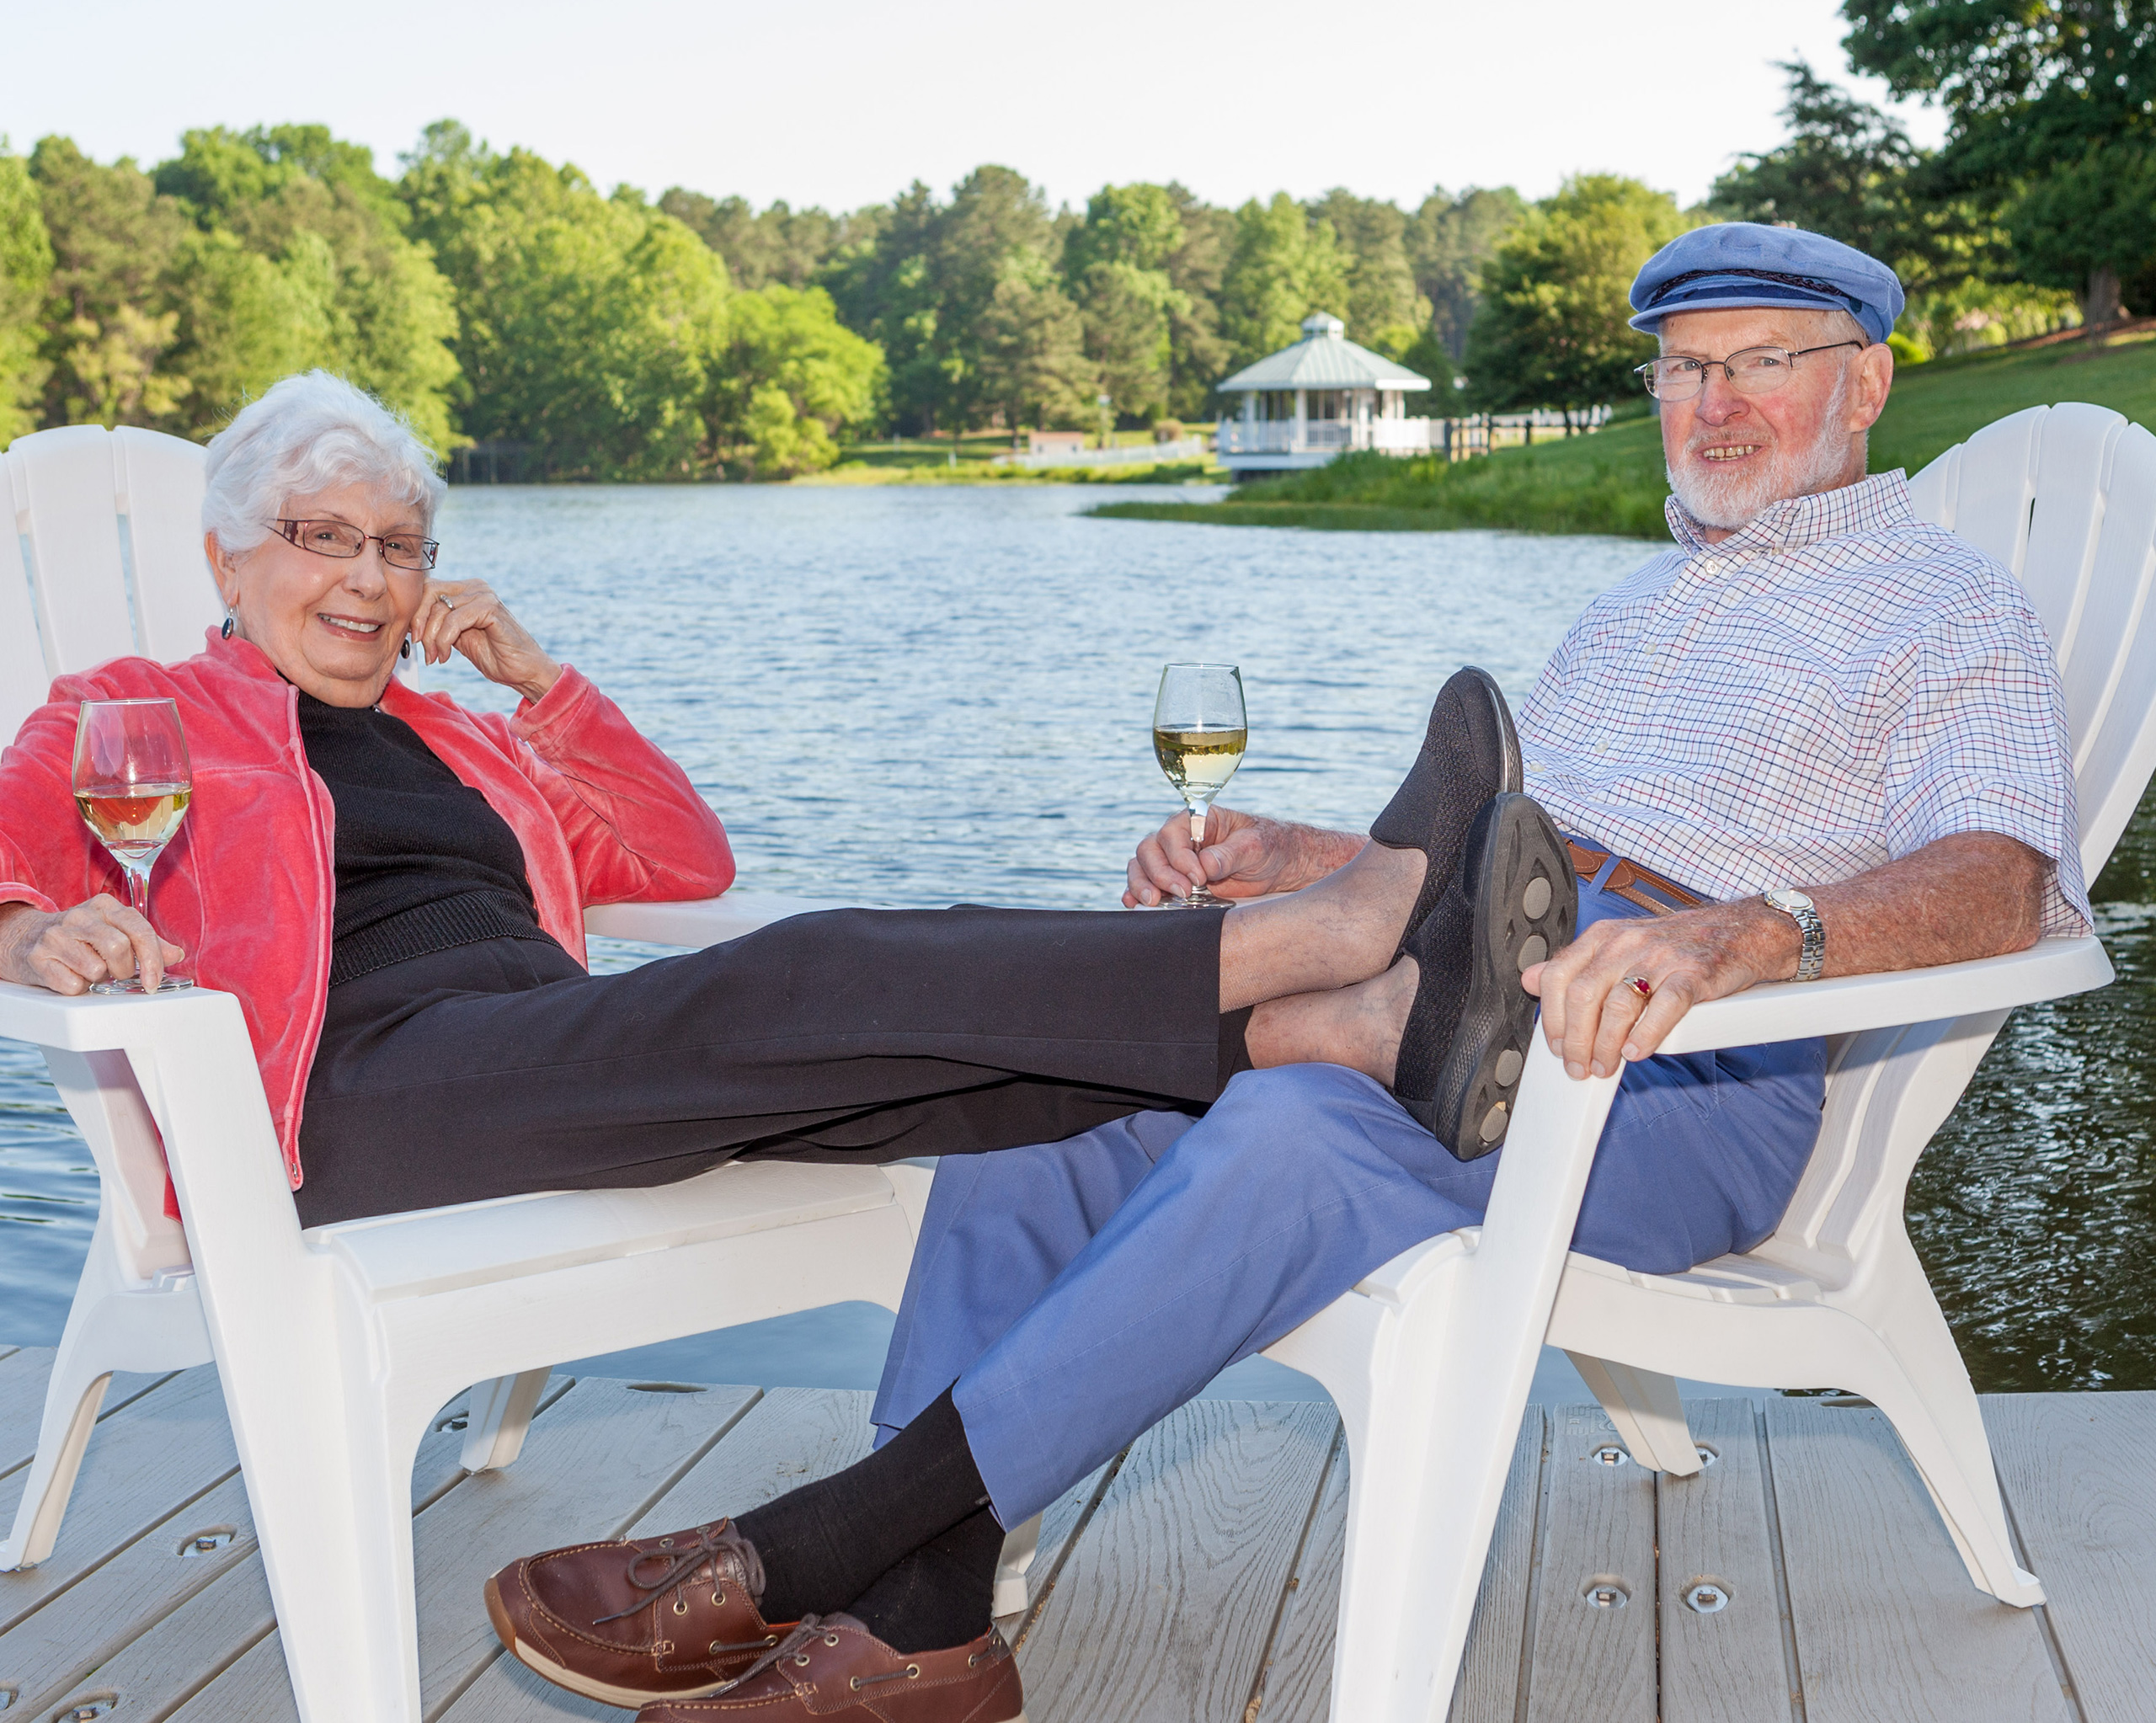 Judge Hess and his wife enjoy some wine while sitting on the dock at the lake